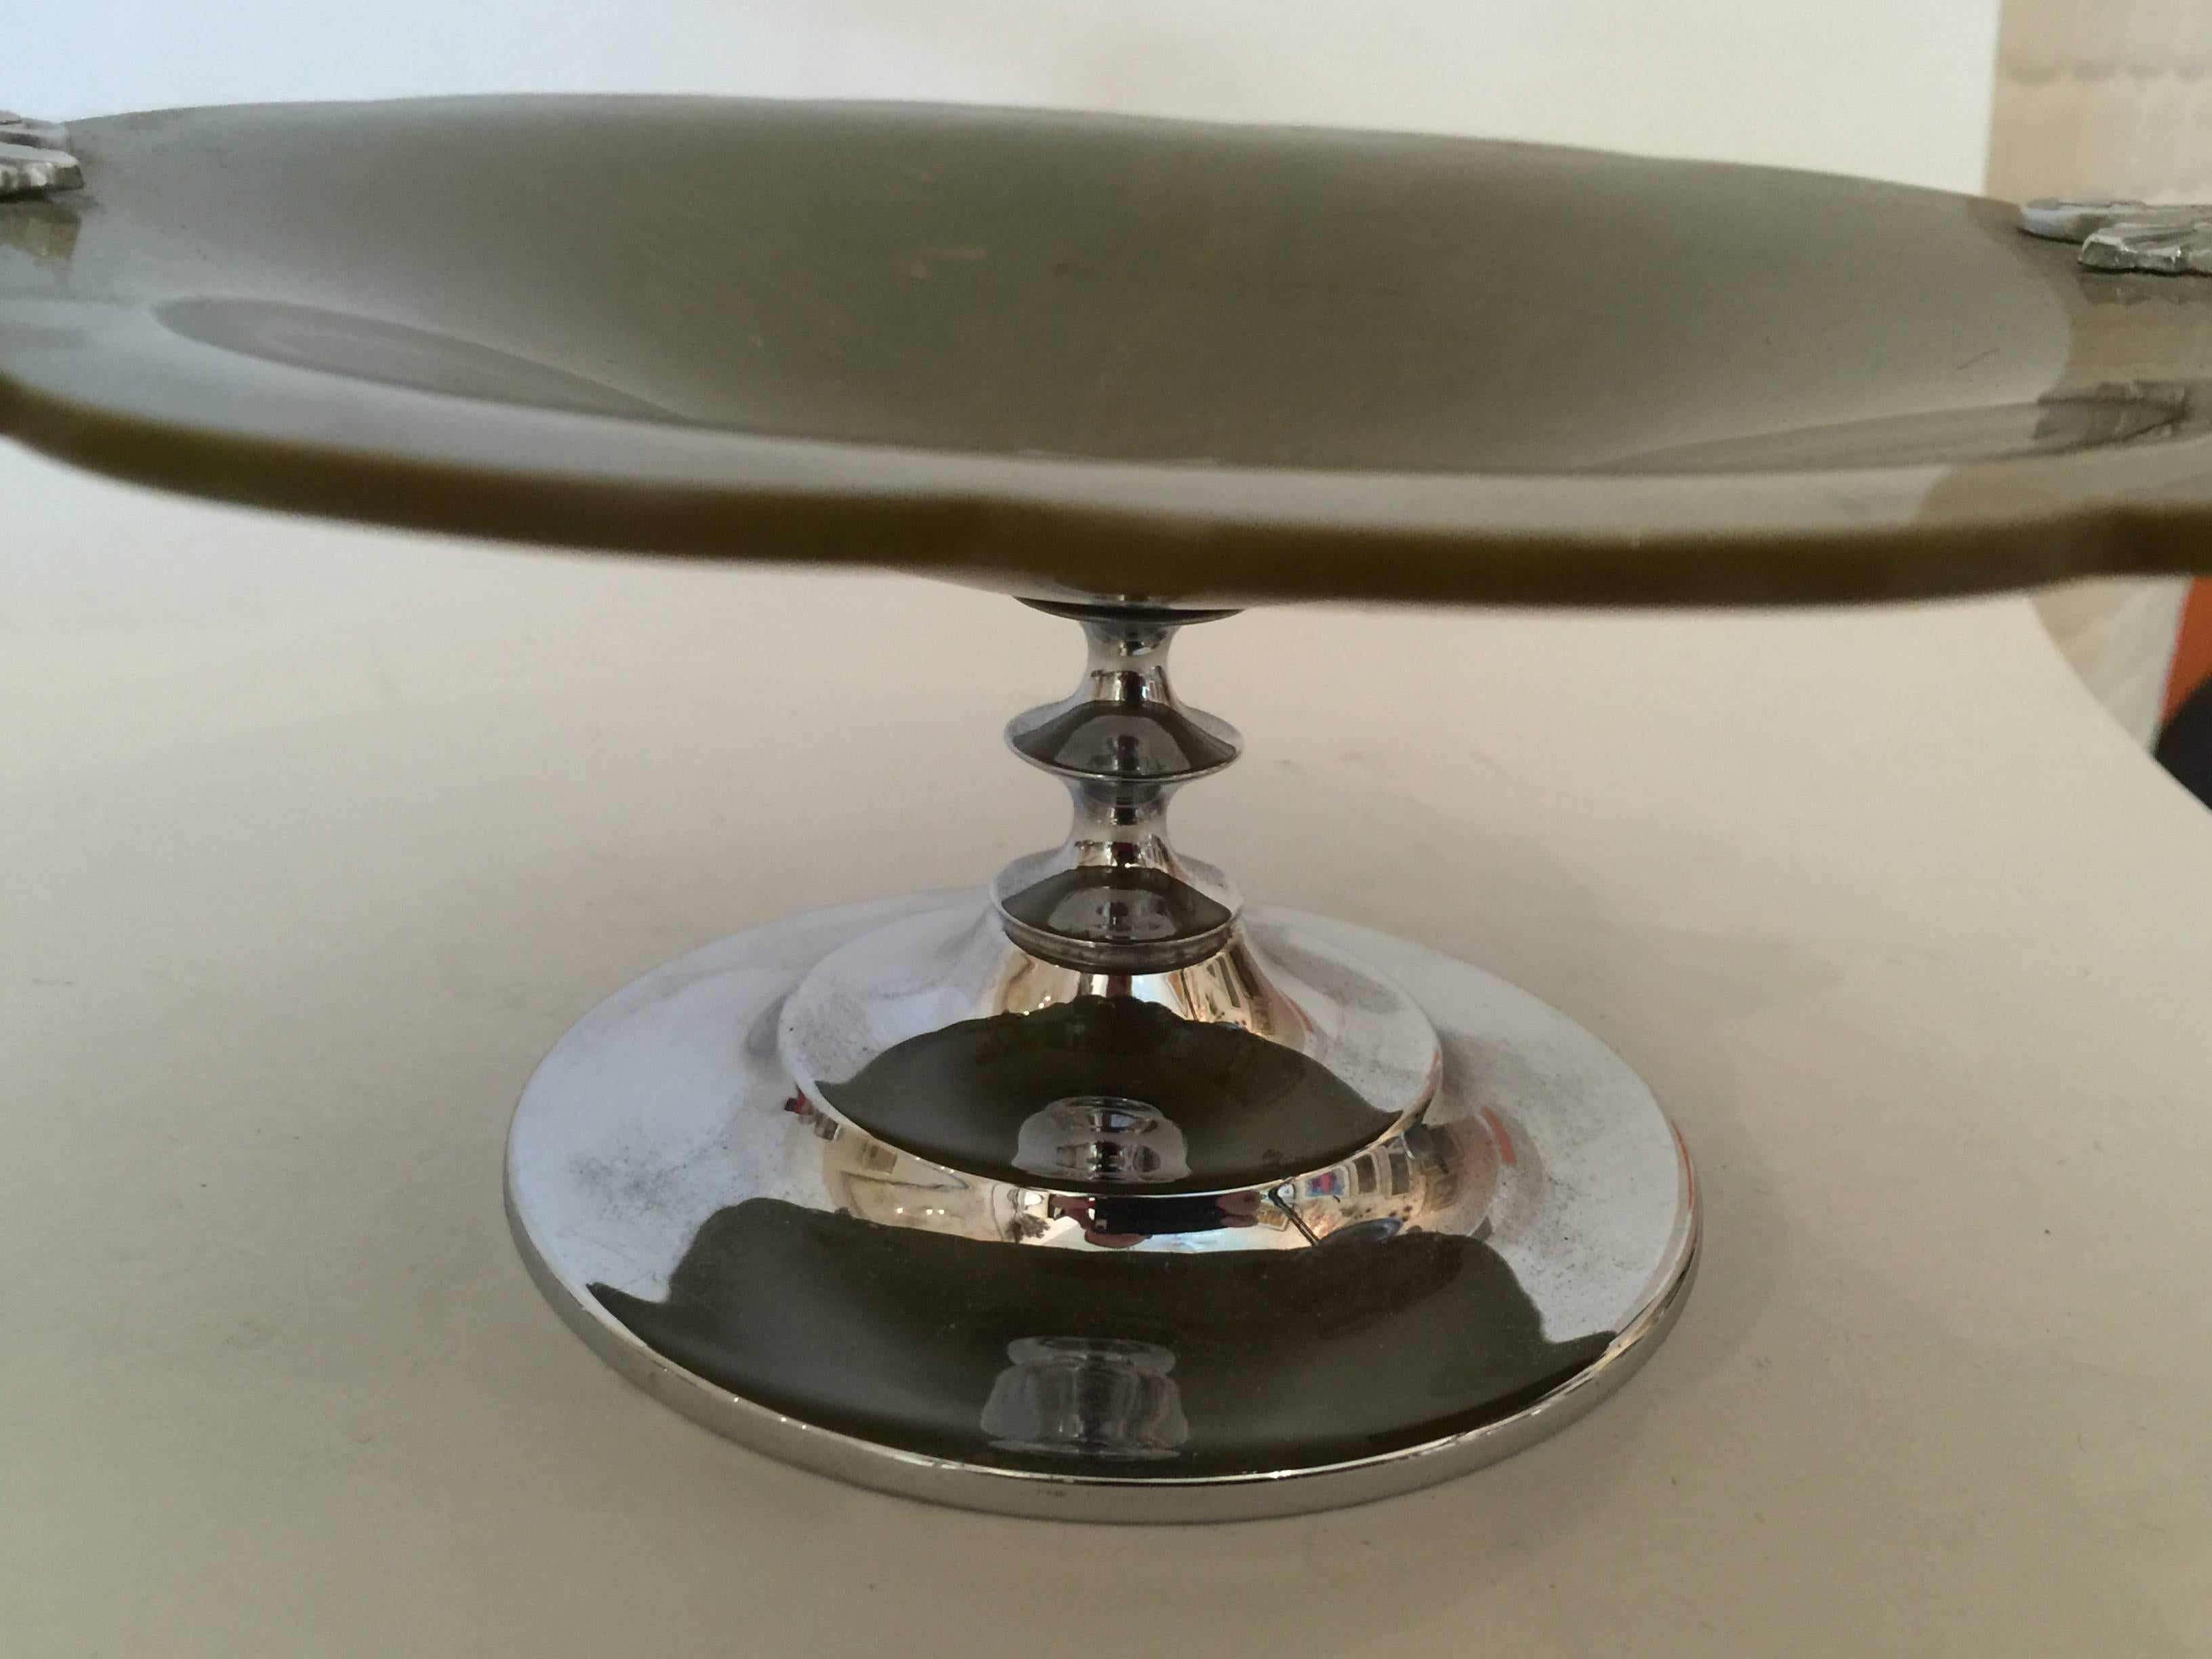 Bakelite and Chrome allied together is one of the most classic art deco material combinations. This Manning Bowman Pin Dish for the vanity table is archetypally art deco in tone and form. The machine age chrome footed concentric circular base is